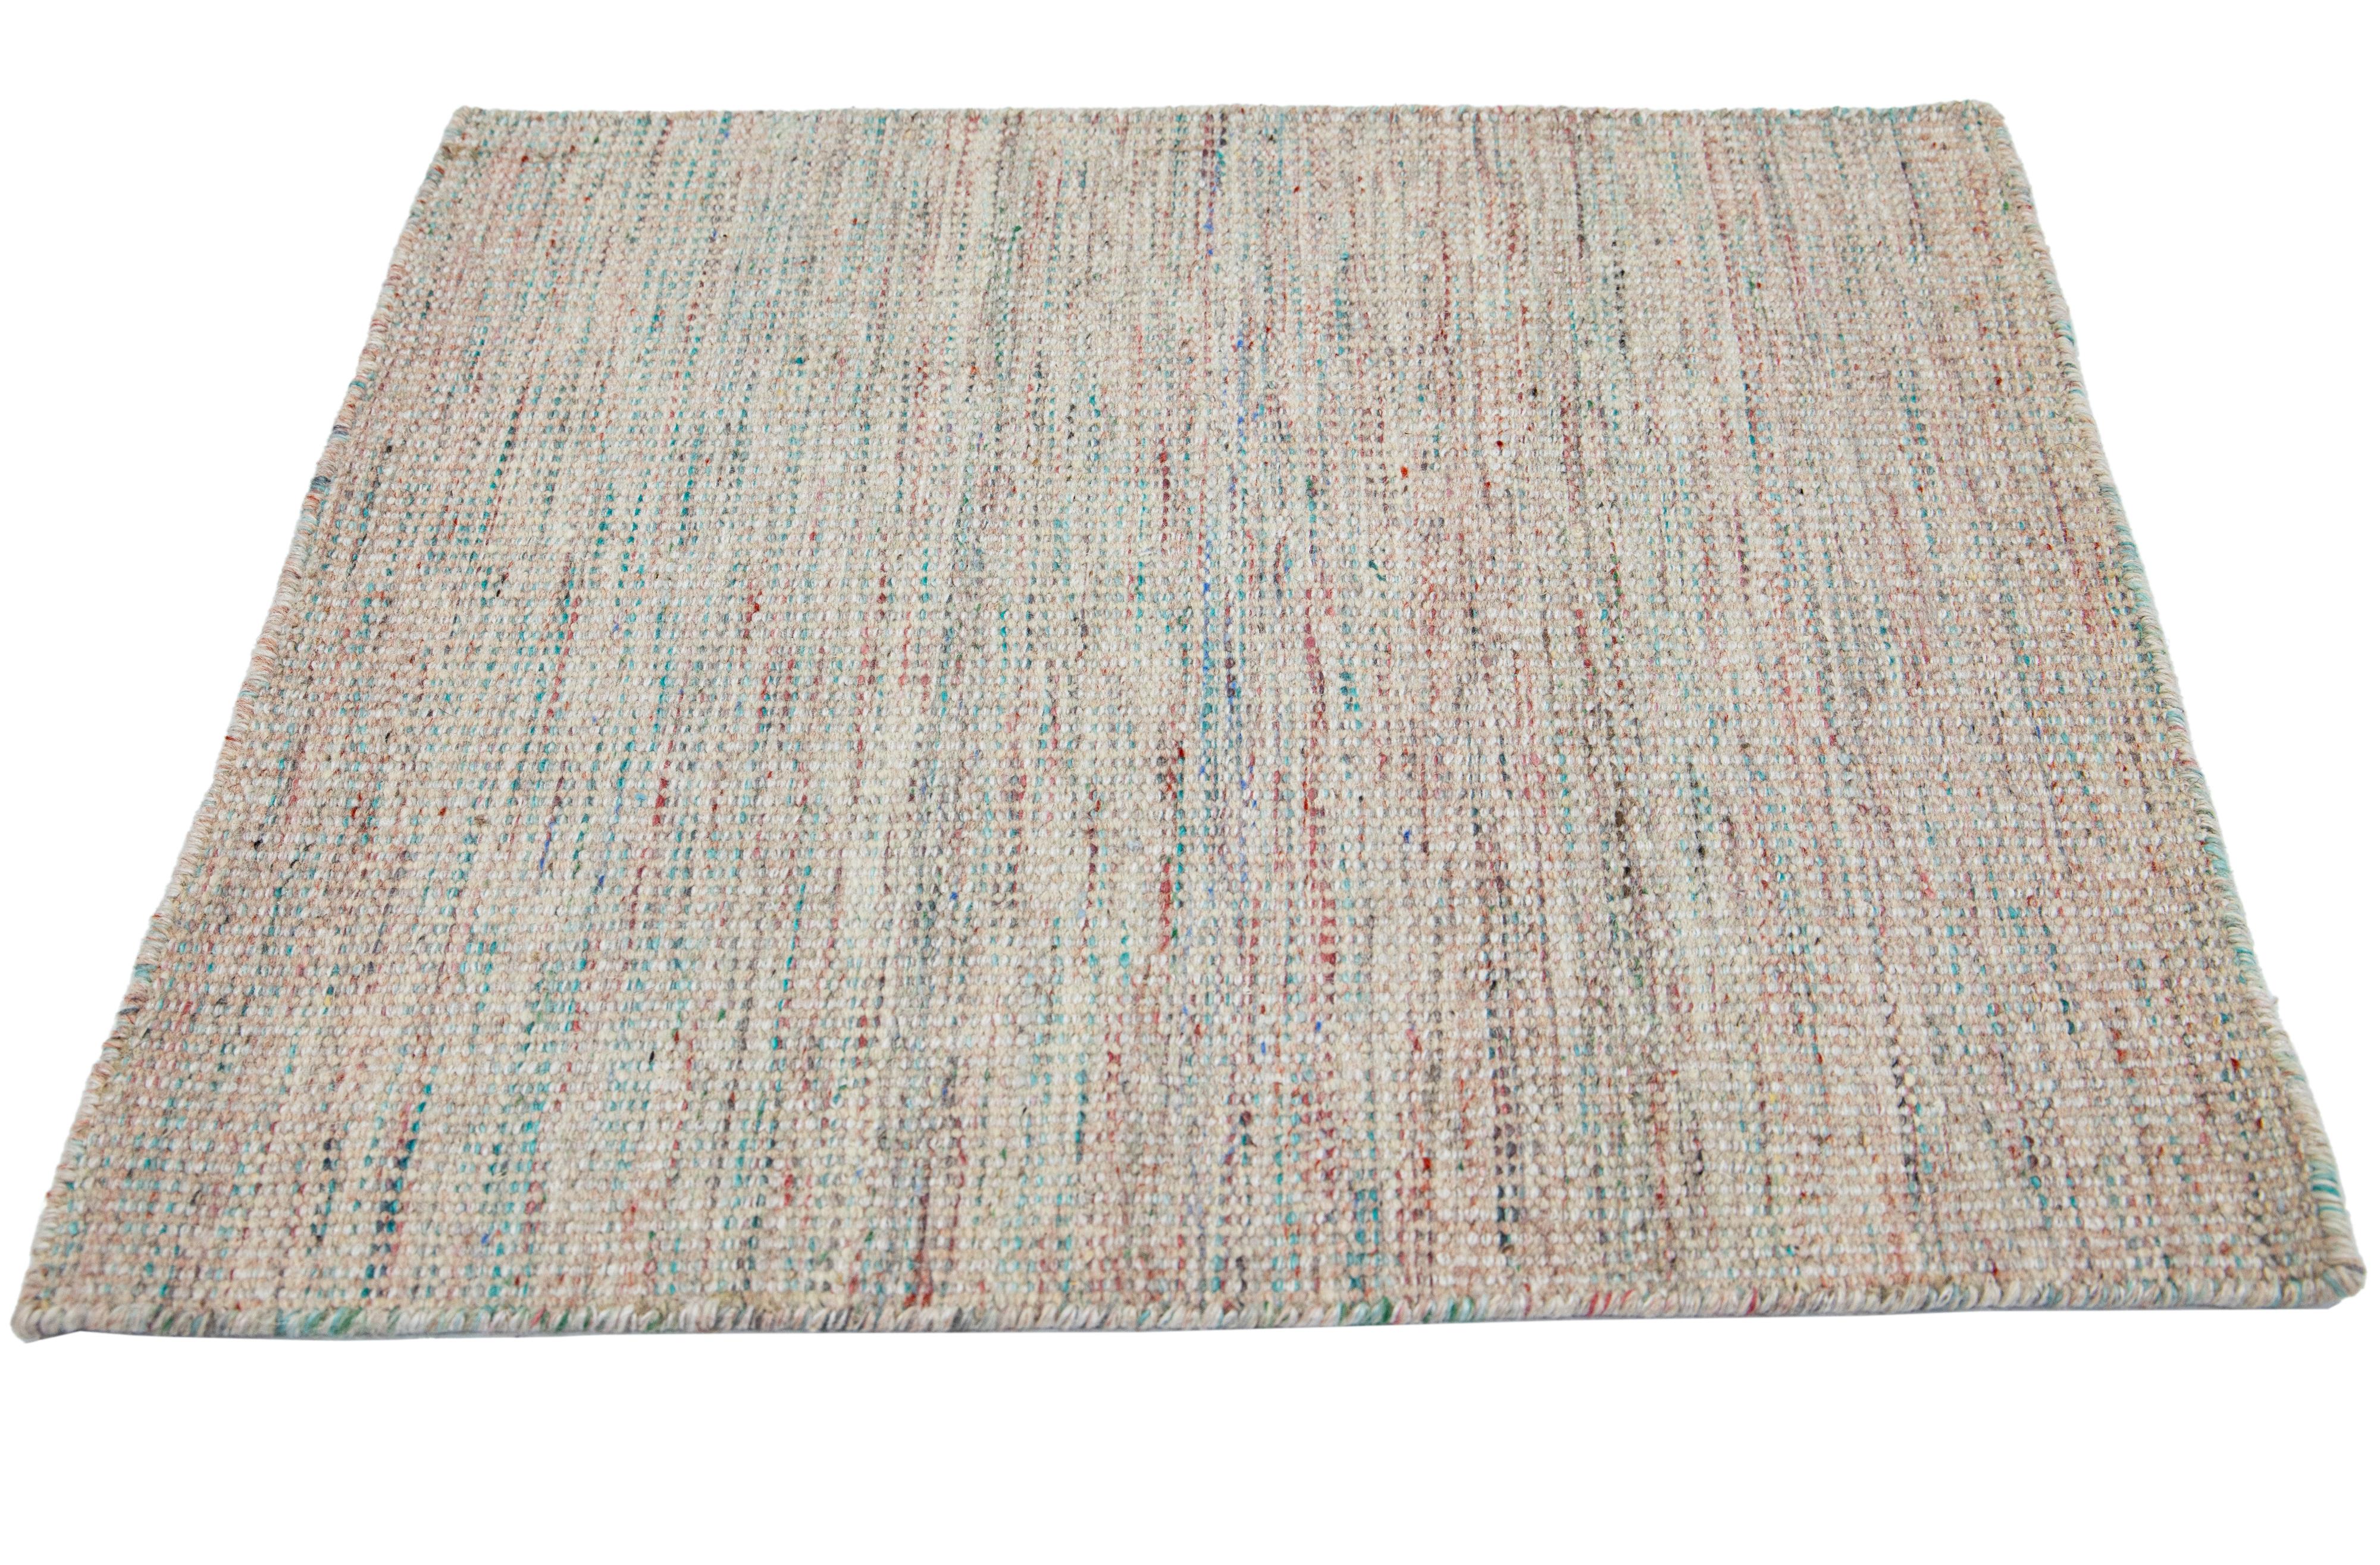 Apadana's Kilim Flatweave wool custom rug. Custom sizes and colors made-to-order.

Material: Wool.
Techniques: Flatweave.
Style: Solid-Coastal.
Lead time: Approx. 15-16 weeks available.
Colors: As shown, other custom colors are available.
Origen: